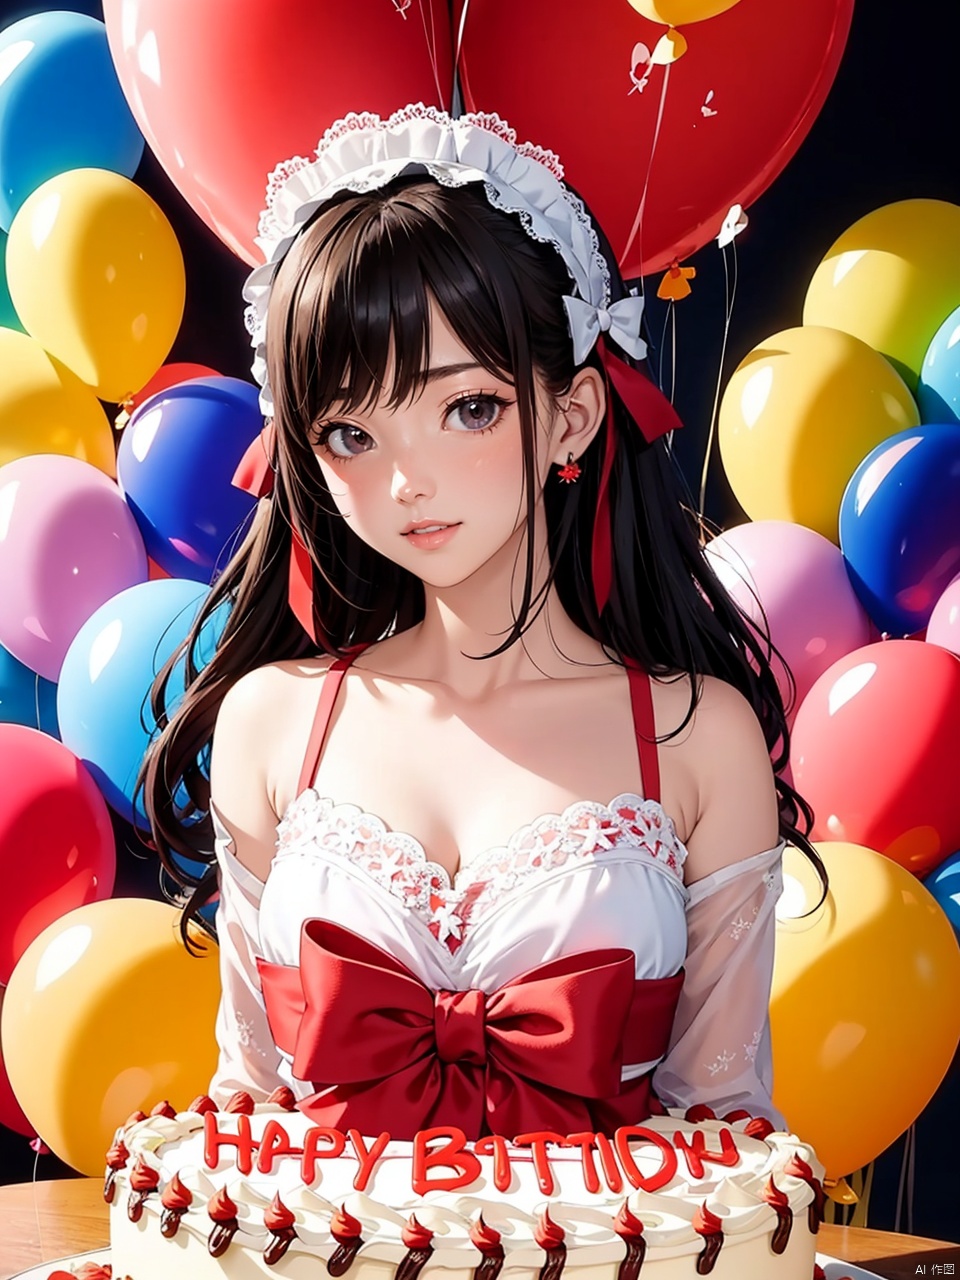 (Masterpiece, best quality)
(detailed light), (an extremely delicate and beautiful), volume light, best shadow, flash, Depth of field, dynamic angle, Oily skin
upper body, 1 Girl on her birthday, extremely detailed big birthday cake,
Colorful Lolita dresses, lots of pretty ruffles, red bows, headbands,
Make a wish
Beautiful elegant room, lots of streamers, balloon
BREAK
生日快乐歌：
Happy birthday to you
Happy birthday to you
Happy birthday, happy birthday
Happy birthday to you
